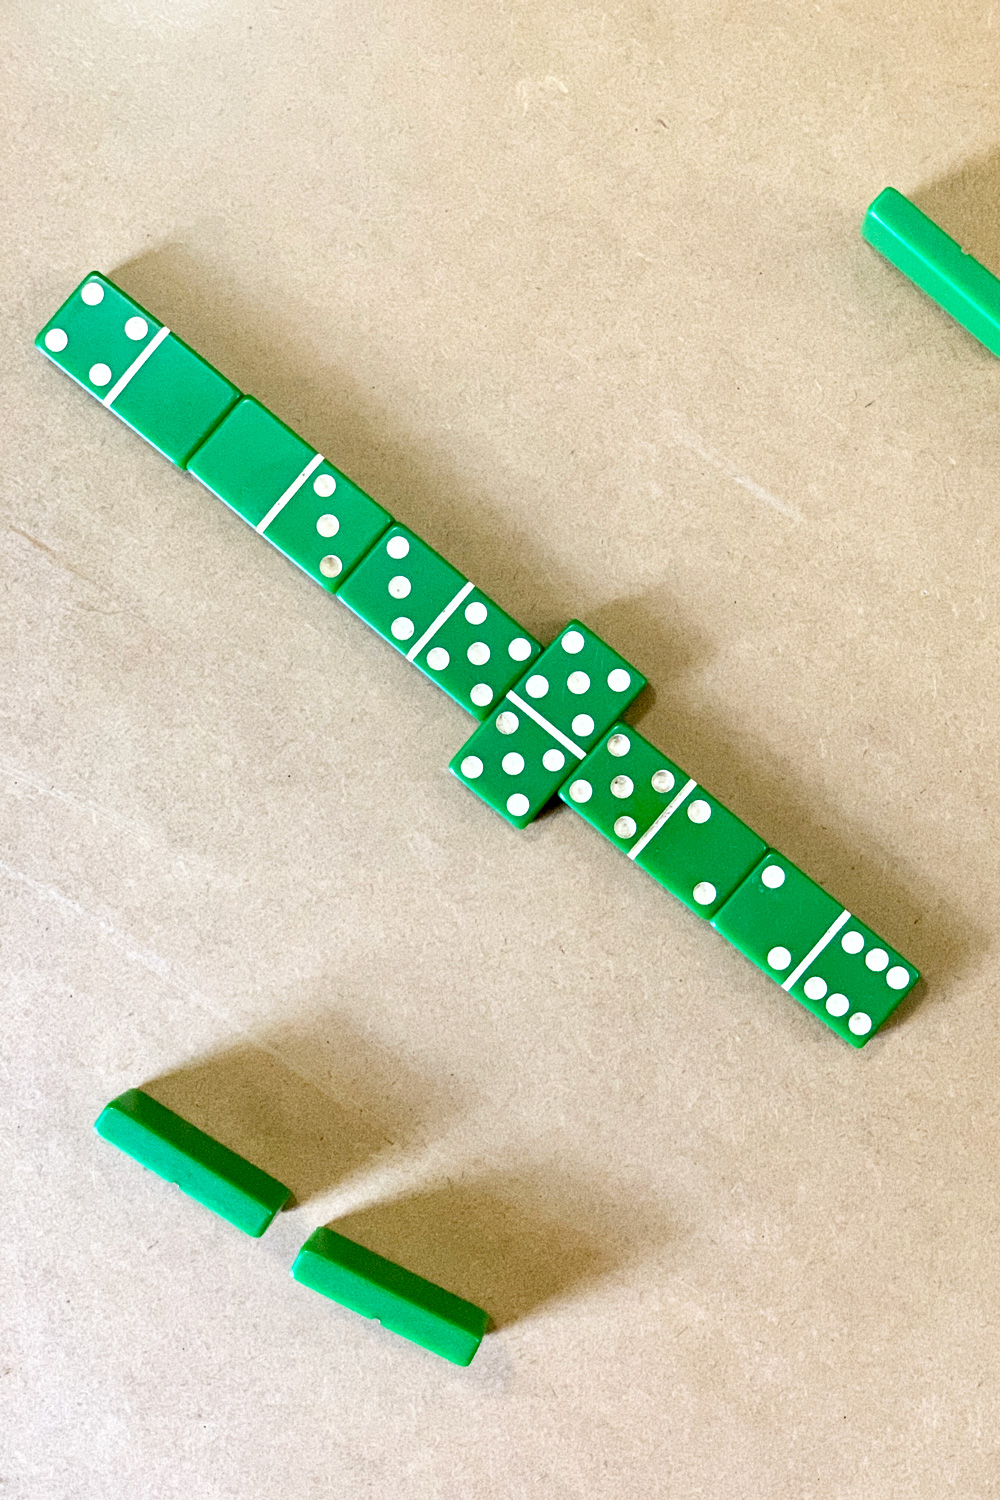 A row of 6 dominoes around a double 5 domino where the opposite ends are 4 and 6.